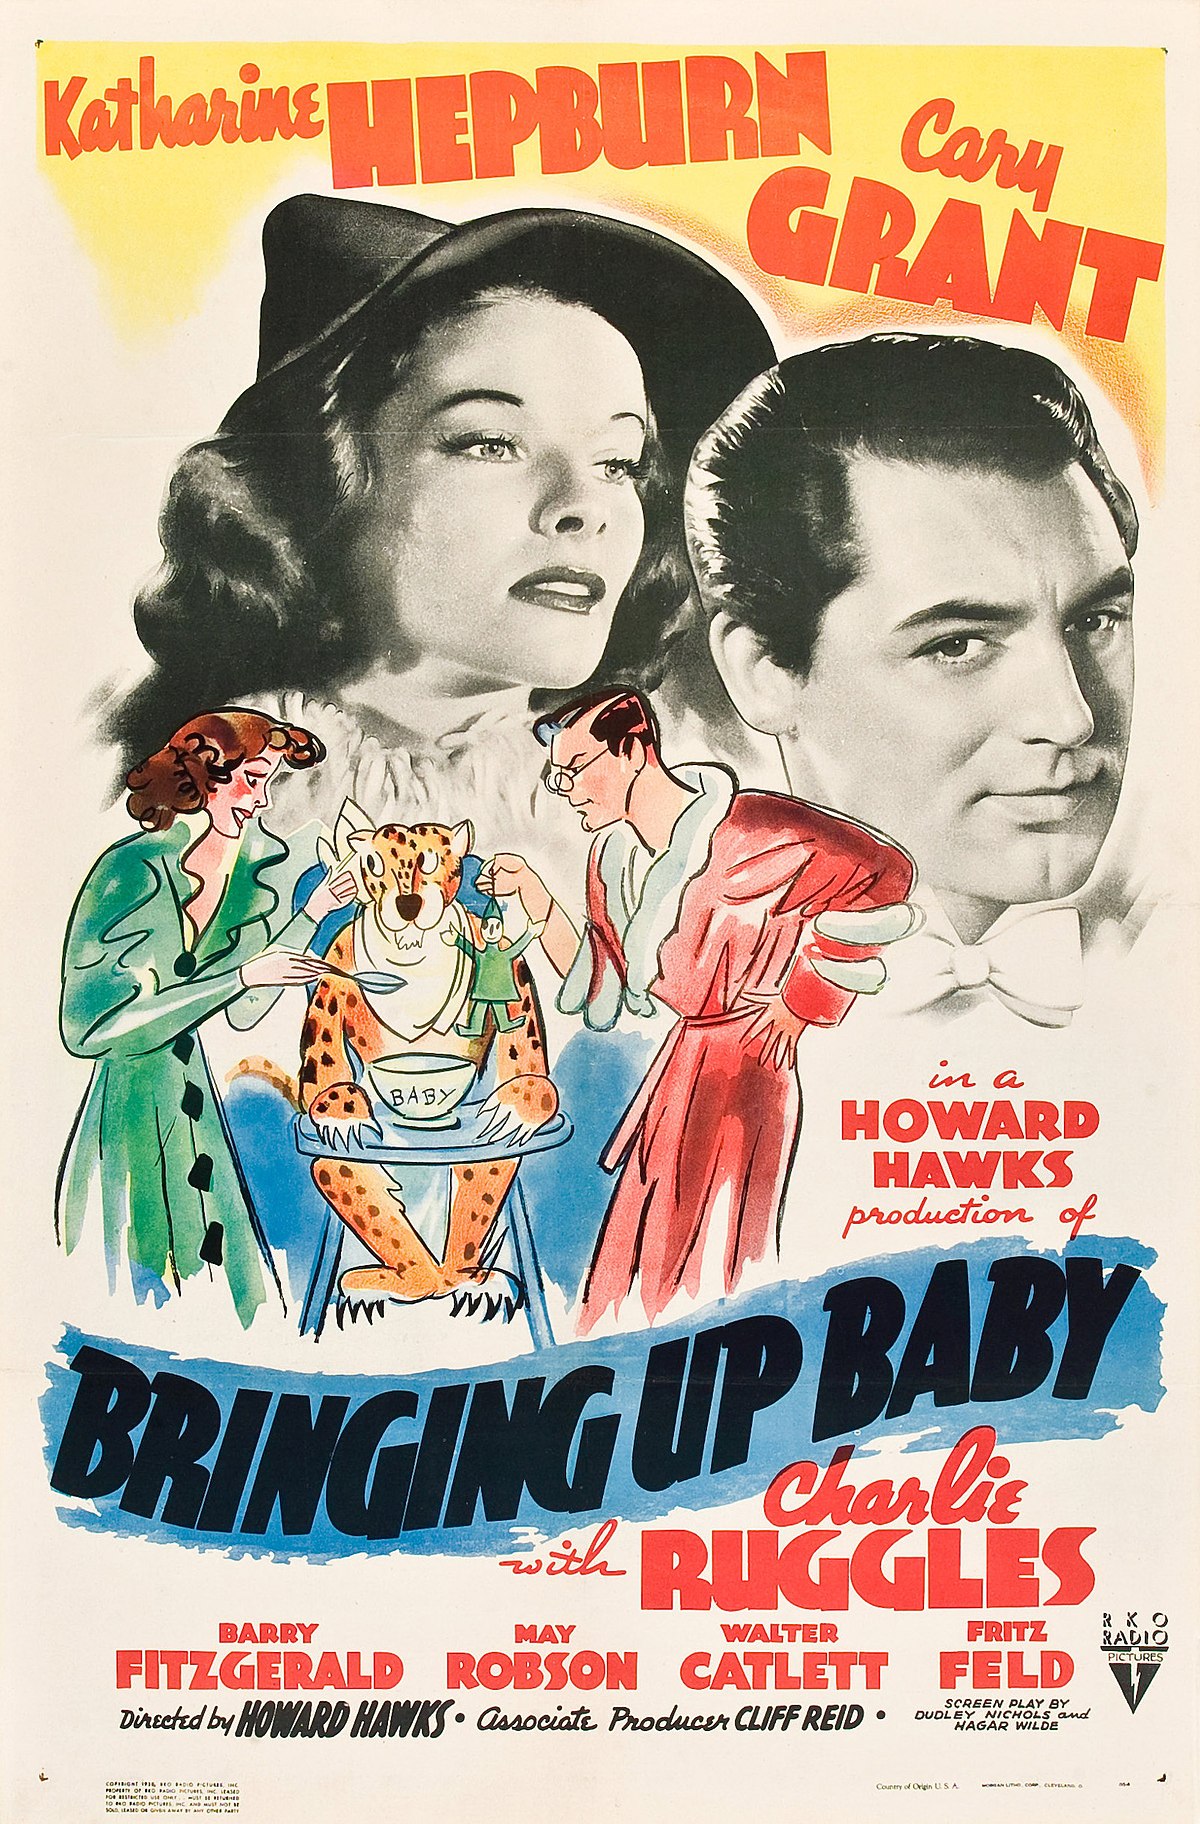 1200px-Bringing_Up_Baby_(1938_poster).jp